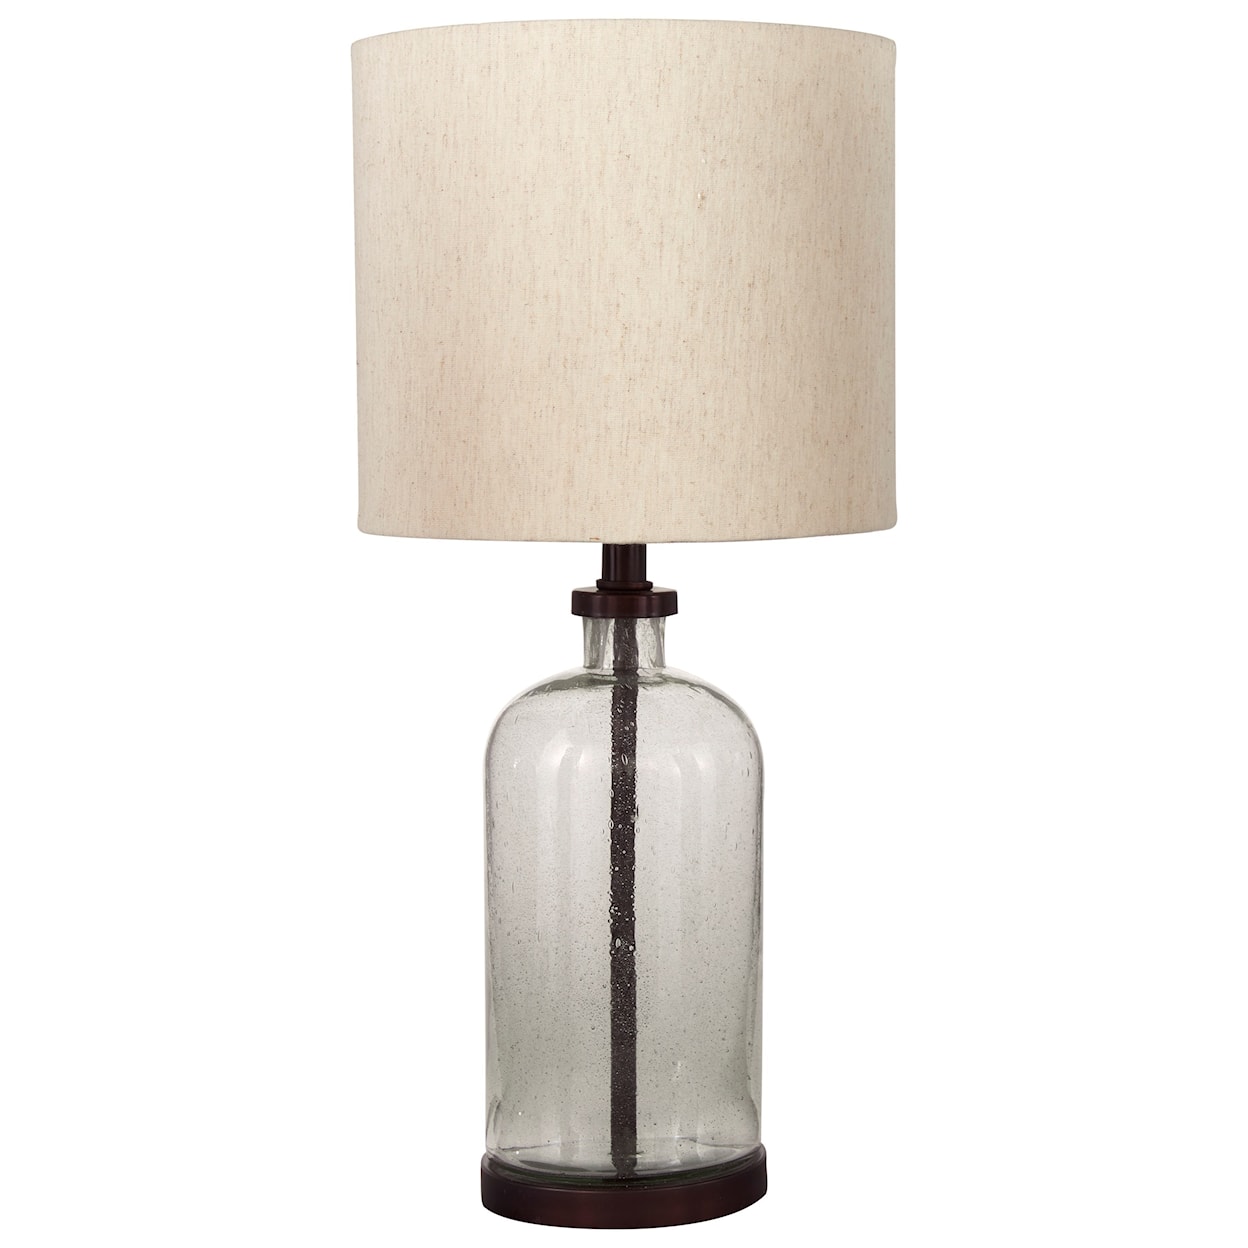 Signature Design by Ashley Lamps - Casual Bandile Clear/Bronze Finish Table Lamp